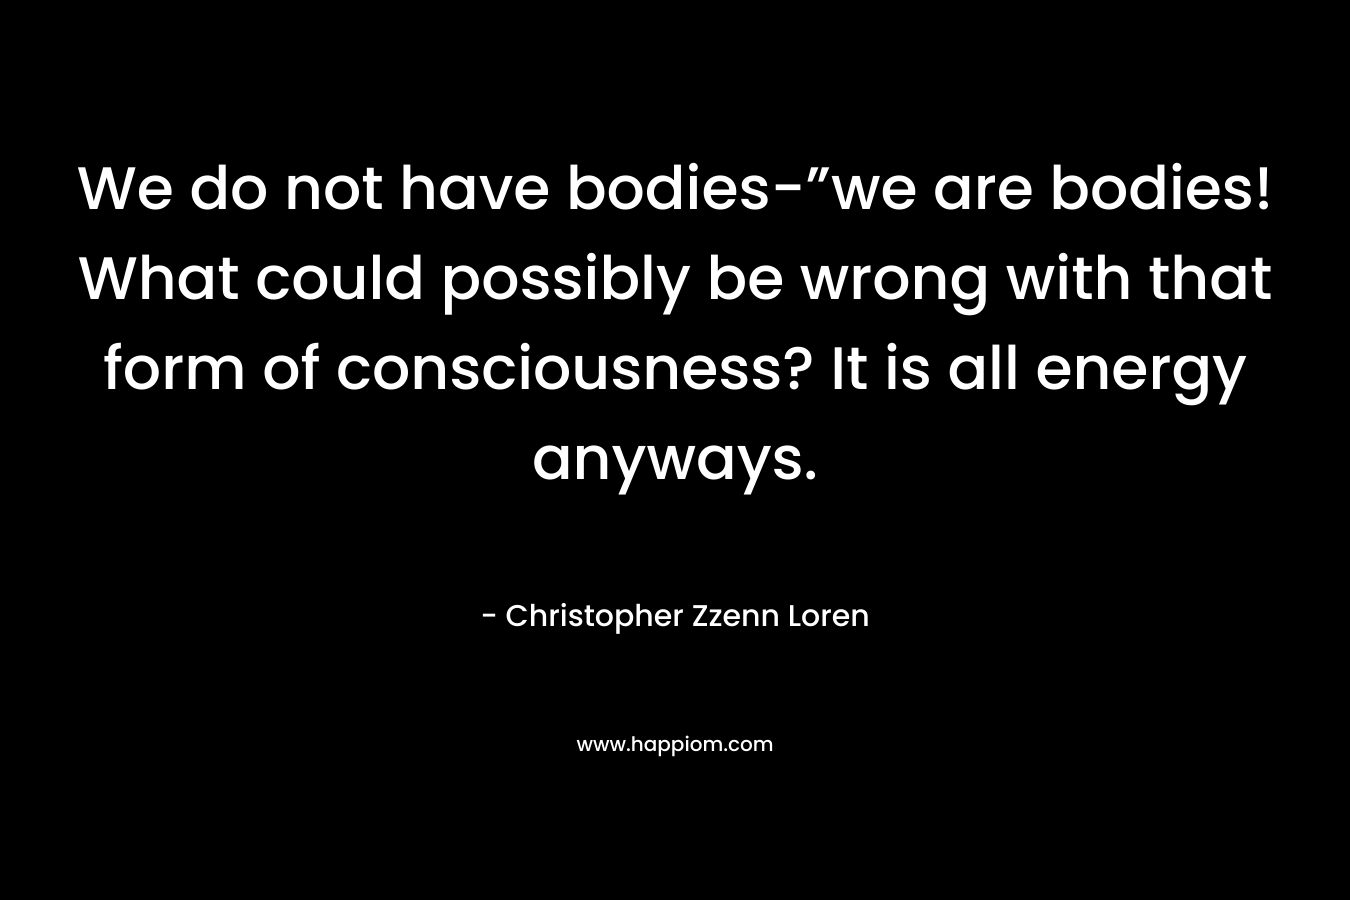 We do not have bodies-”we are bodies! What could possibly be wrong with that form of consciousness? It is all energy anyways.